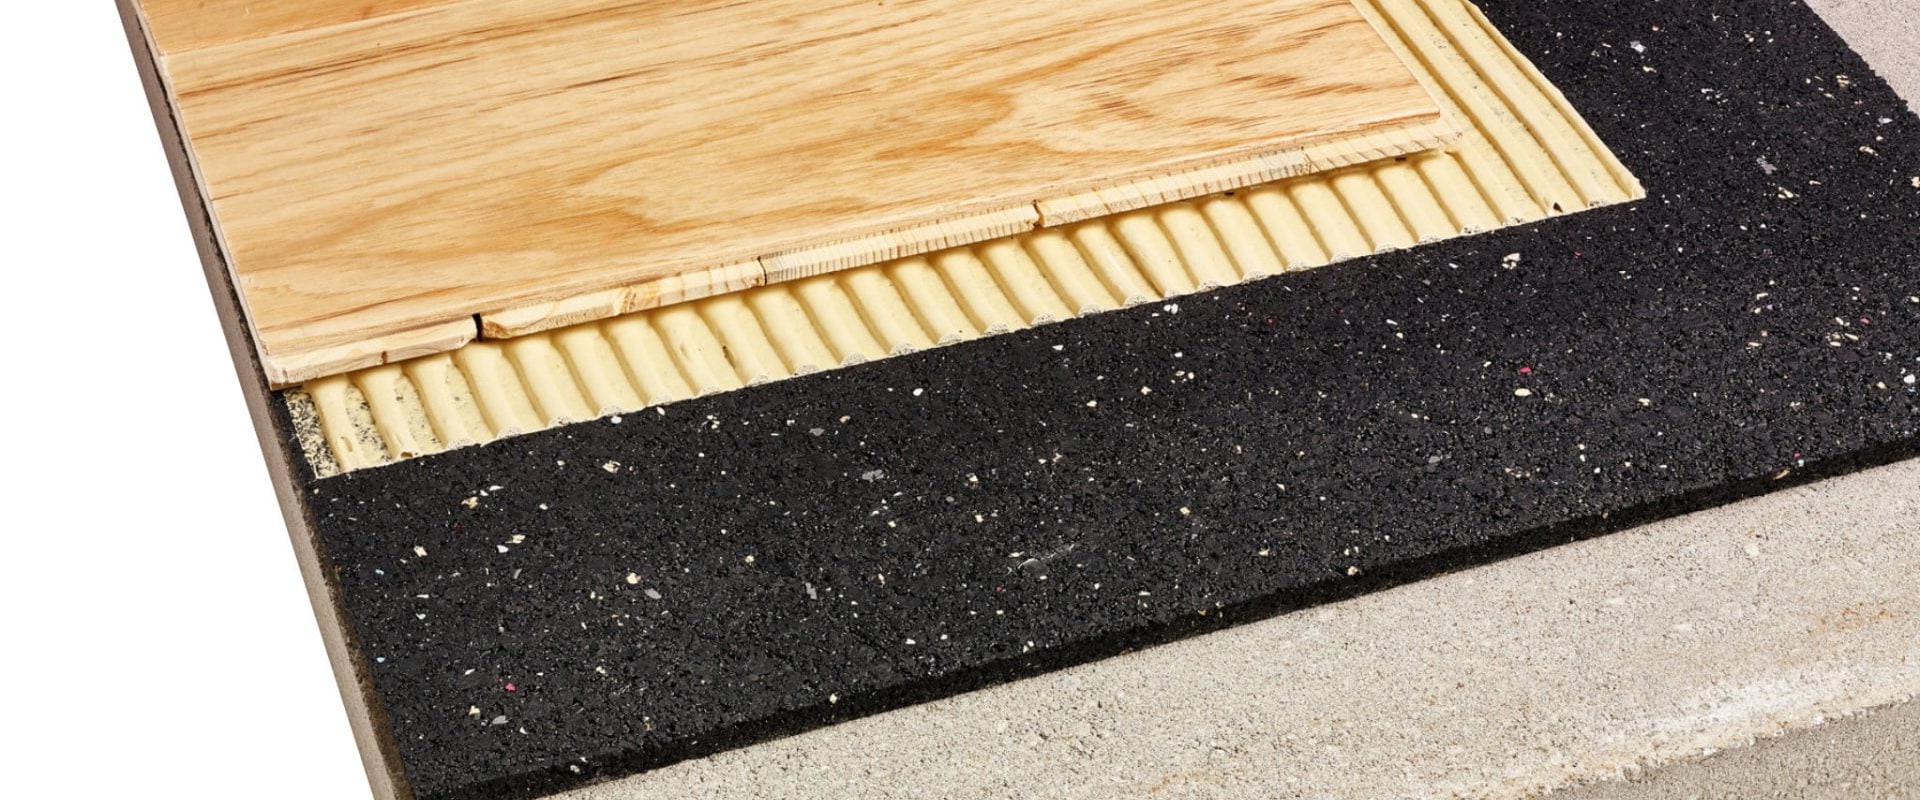 Does Soundproof Underlay Reduce Noise from Footsteps?